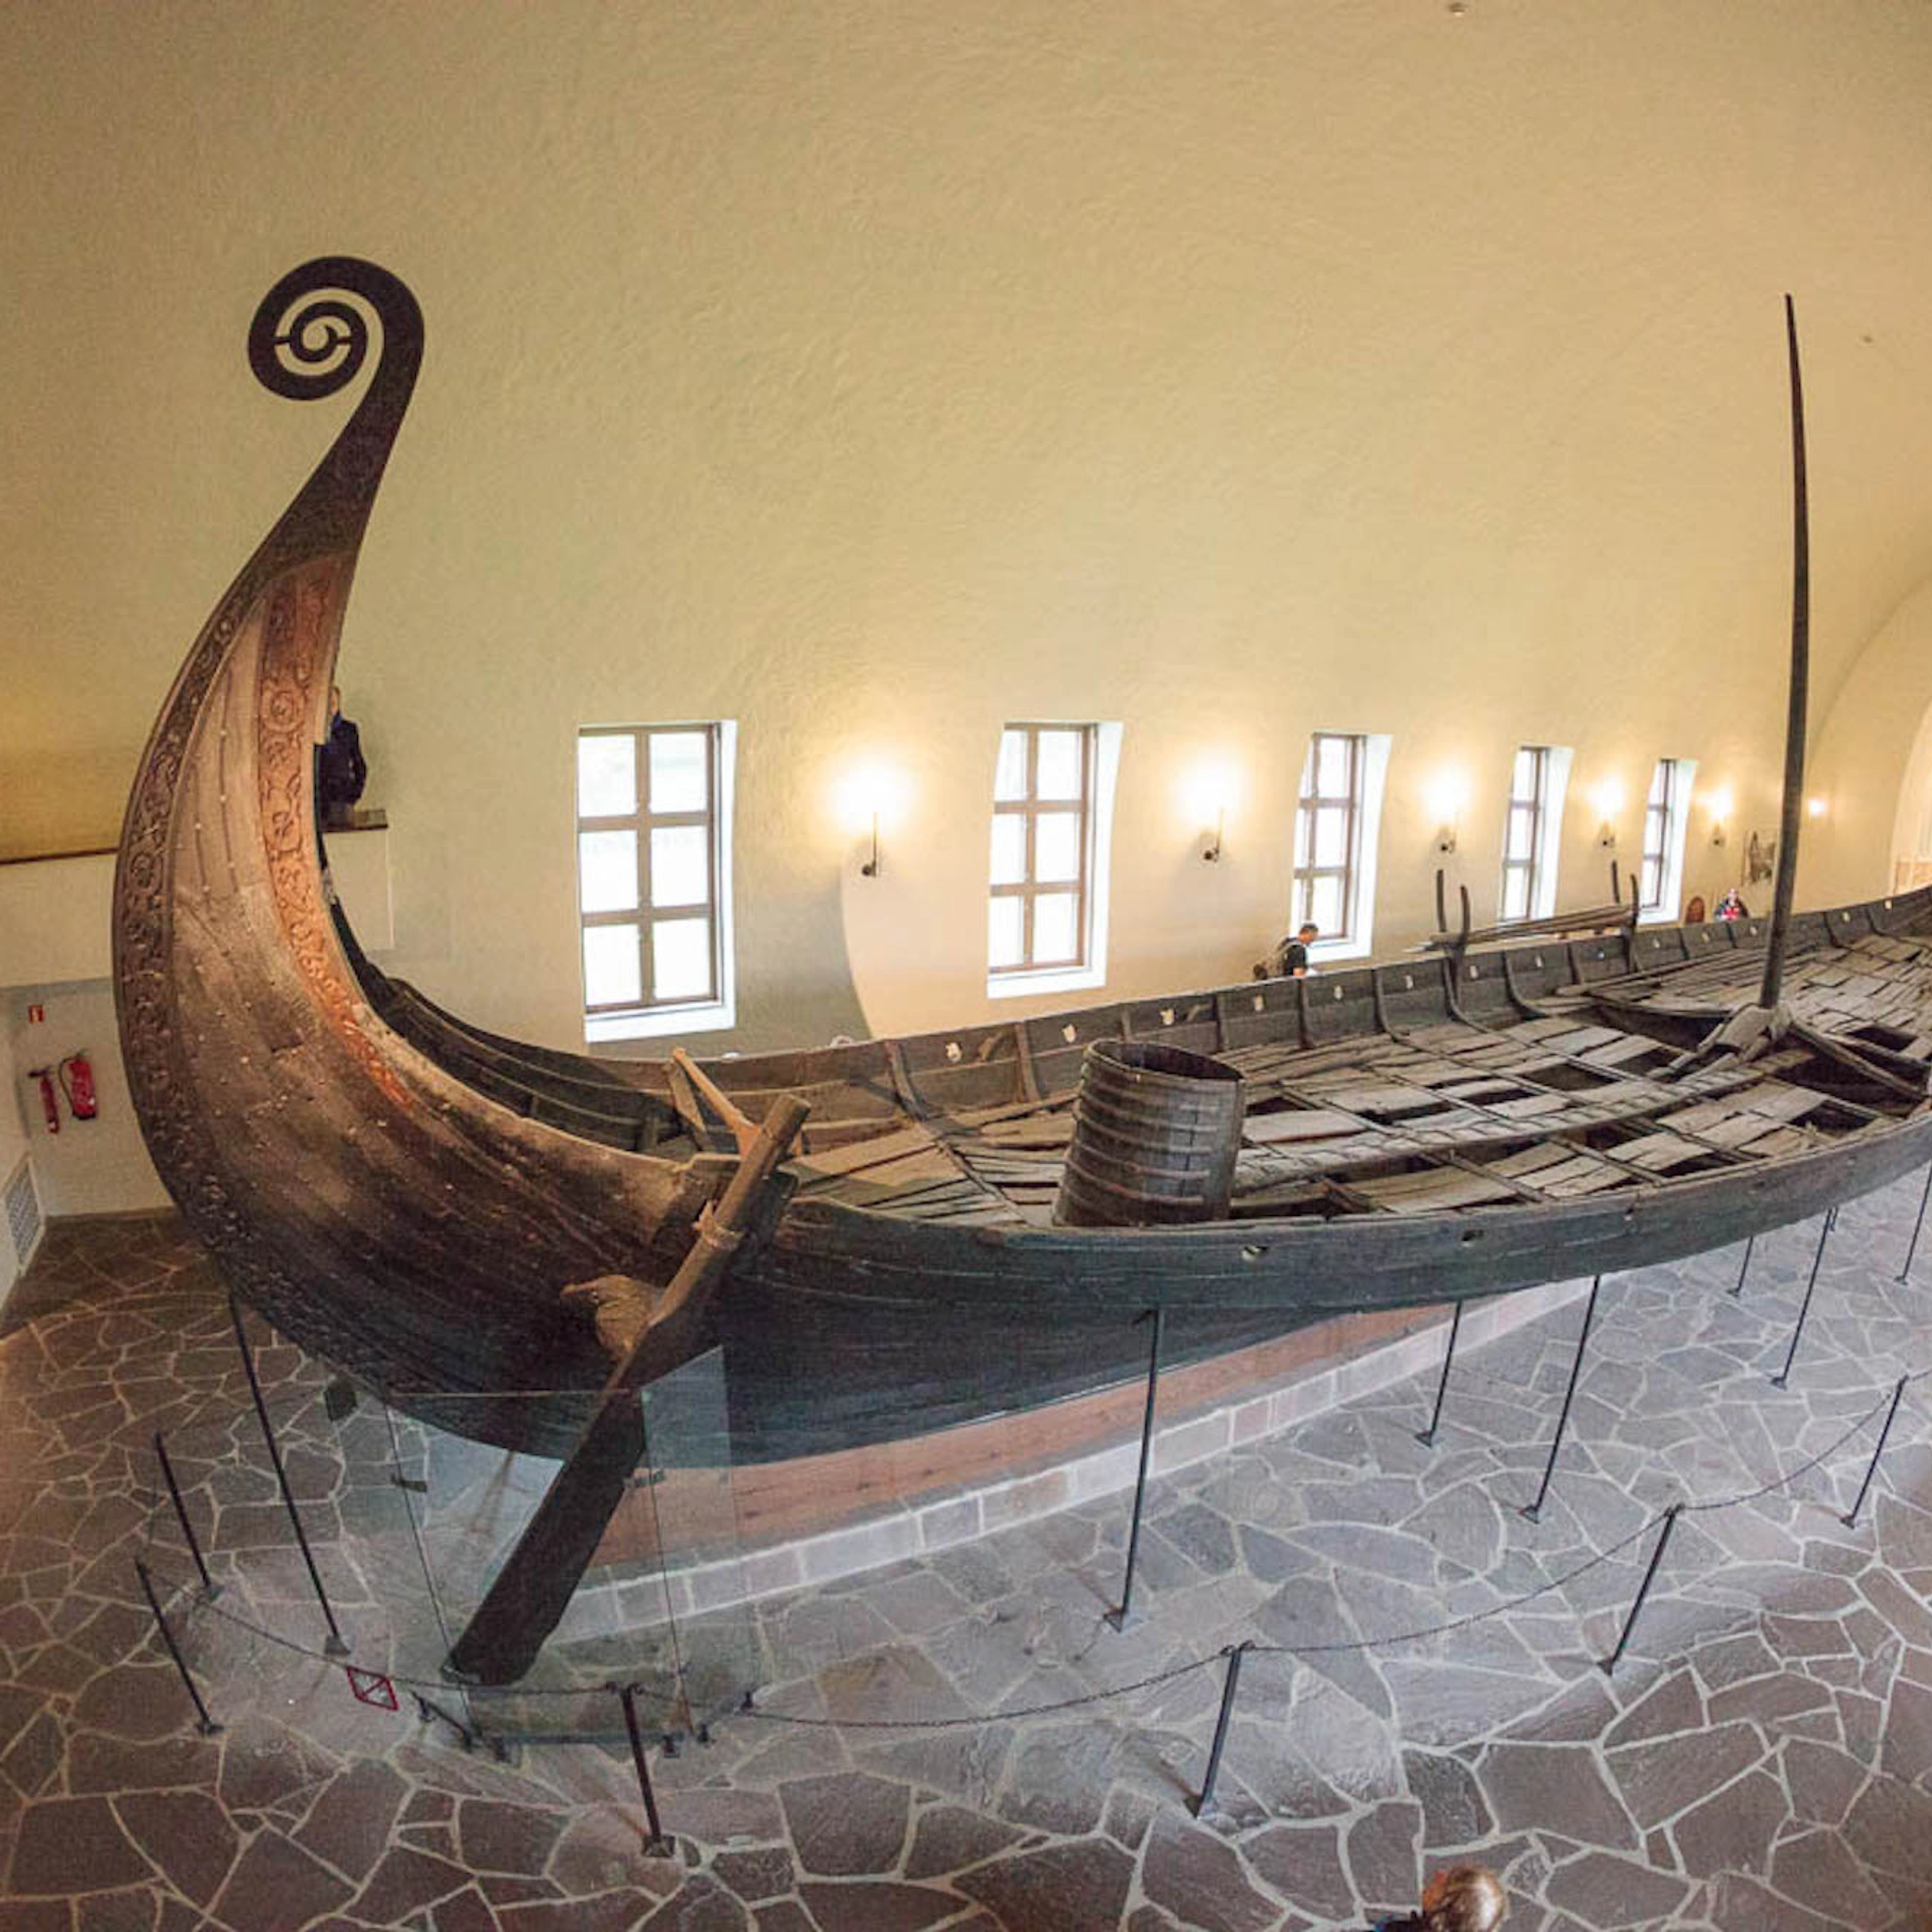 Vikingship Museum in Oslo - Go Viking with Fjord Tours , Oslo, Norway